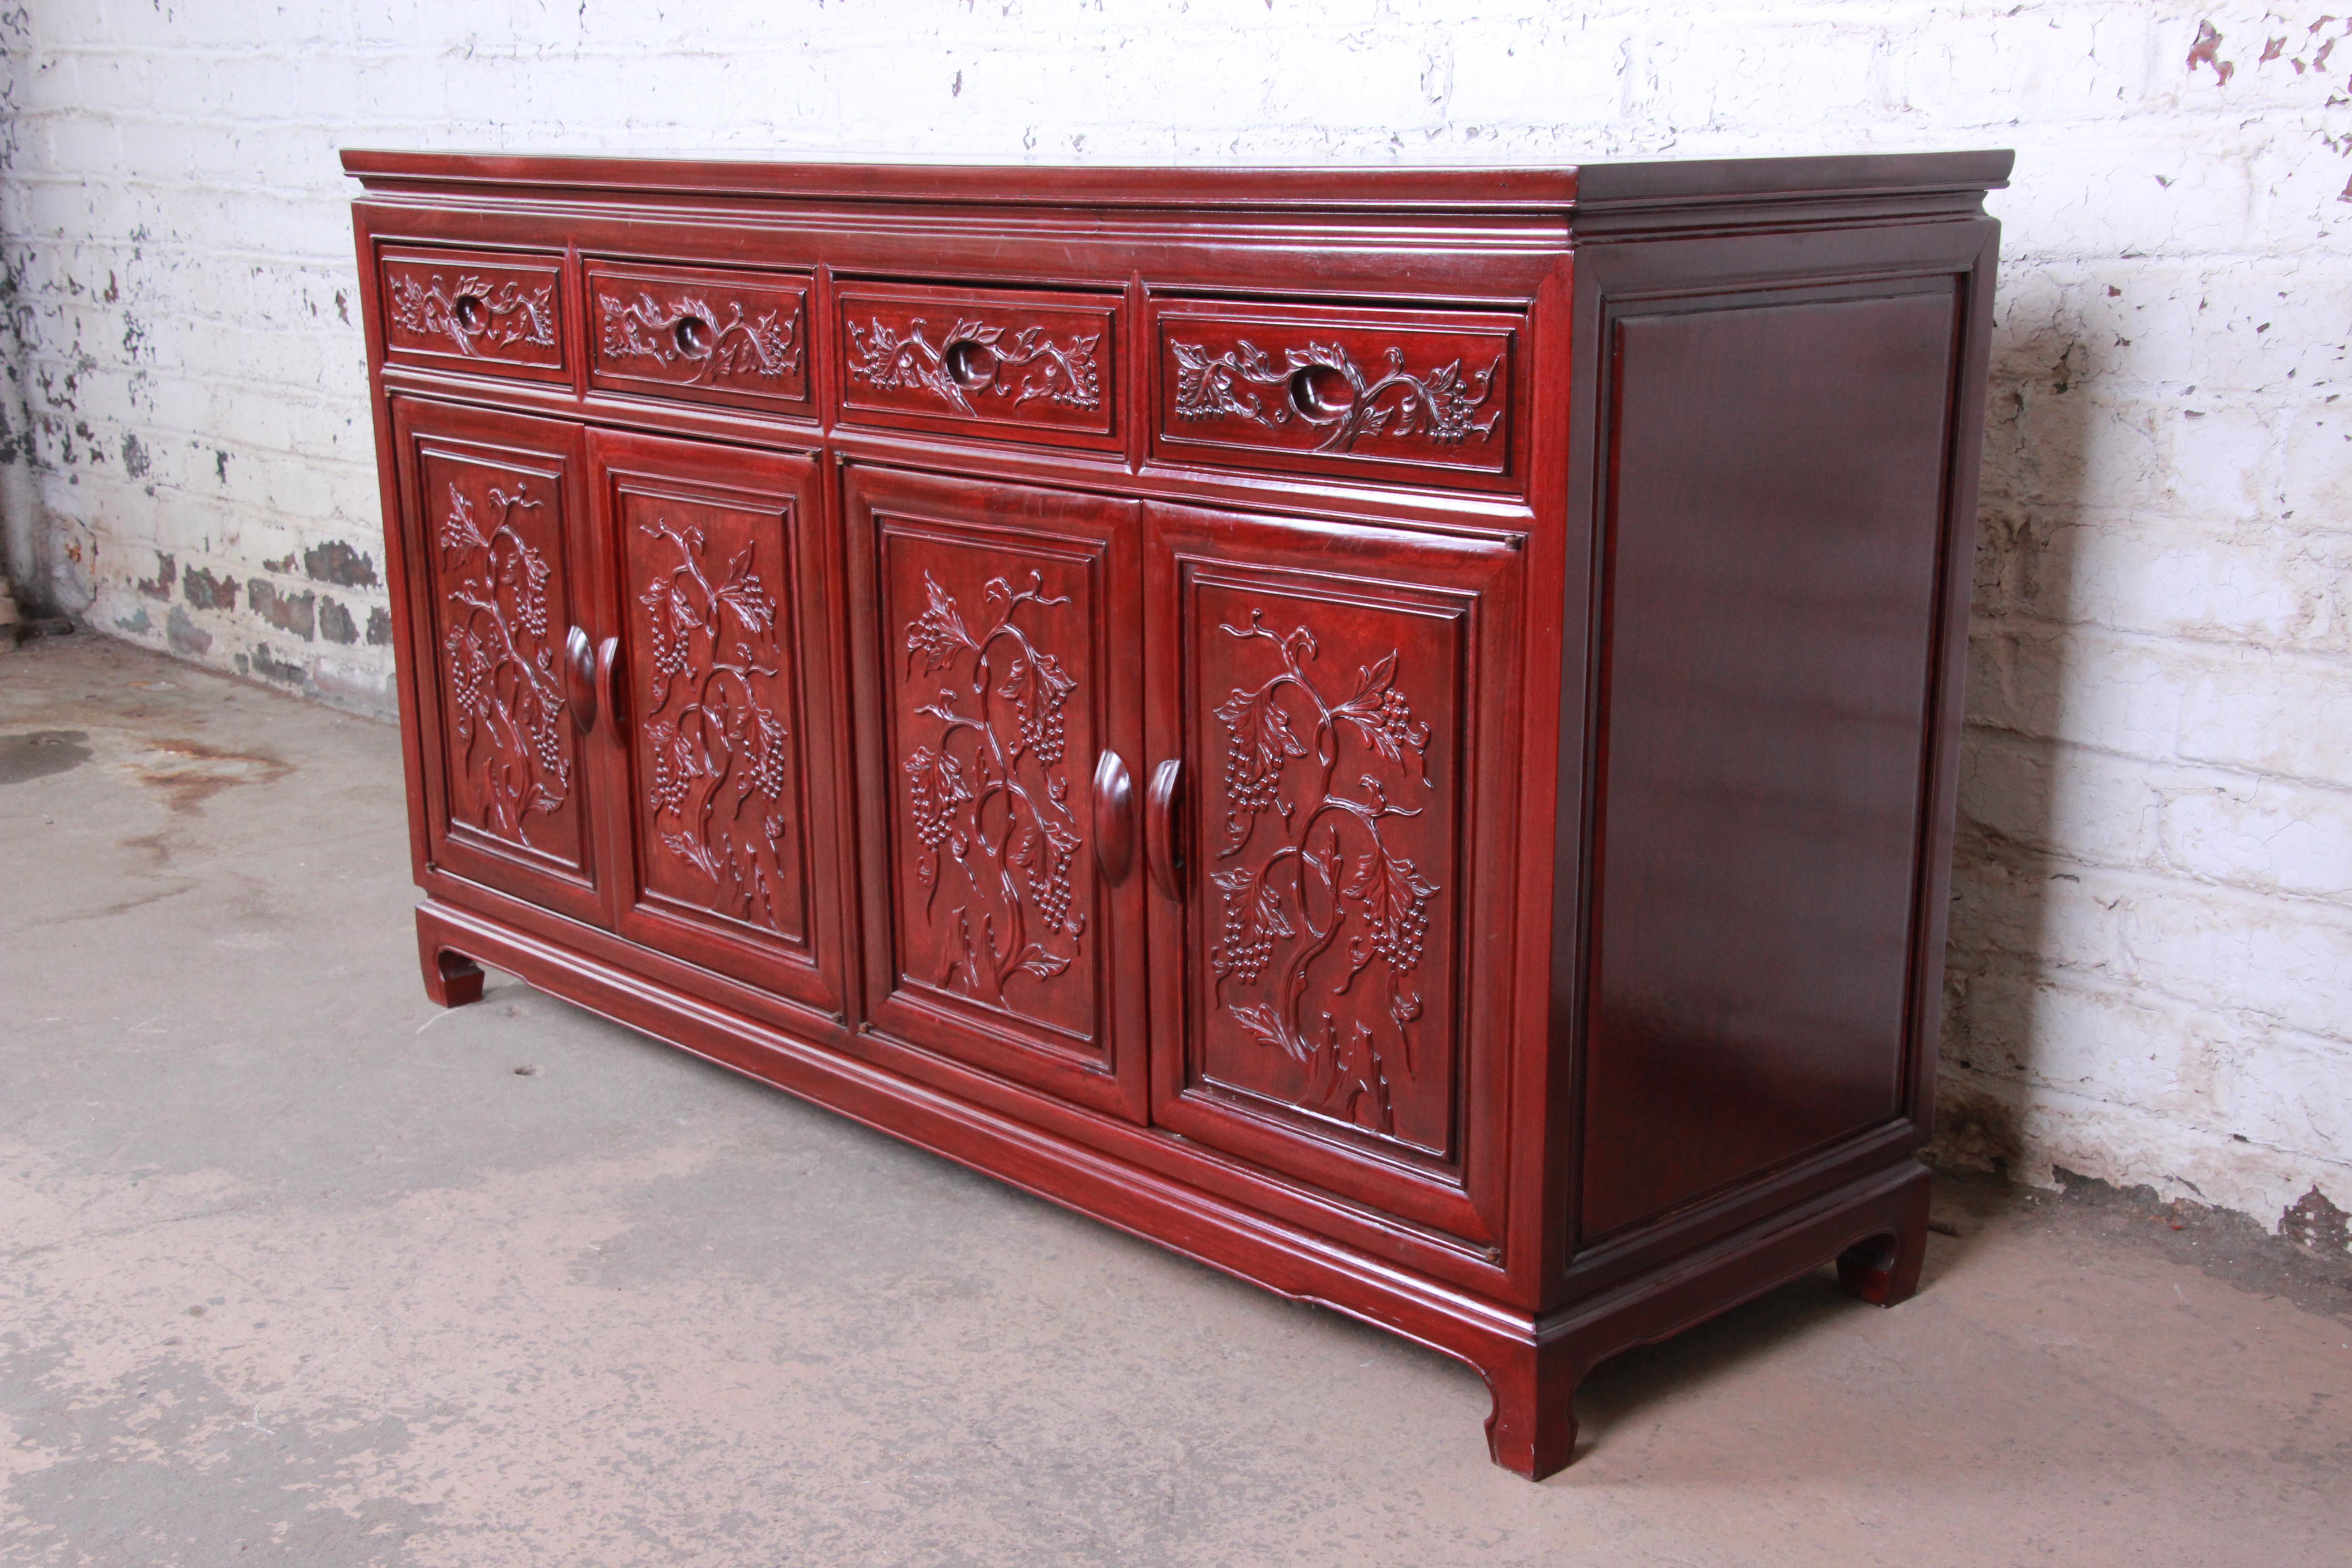 A stunning Chinese carved solid rosewood sideboard or credenza. The sideboard featured gorgeous wood grain and nice floral carvings. It offers ample storage, with four dovetailed drawers and two shelves behind four carved doors. The drawers are